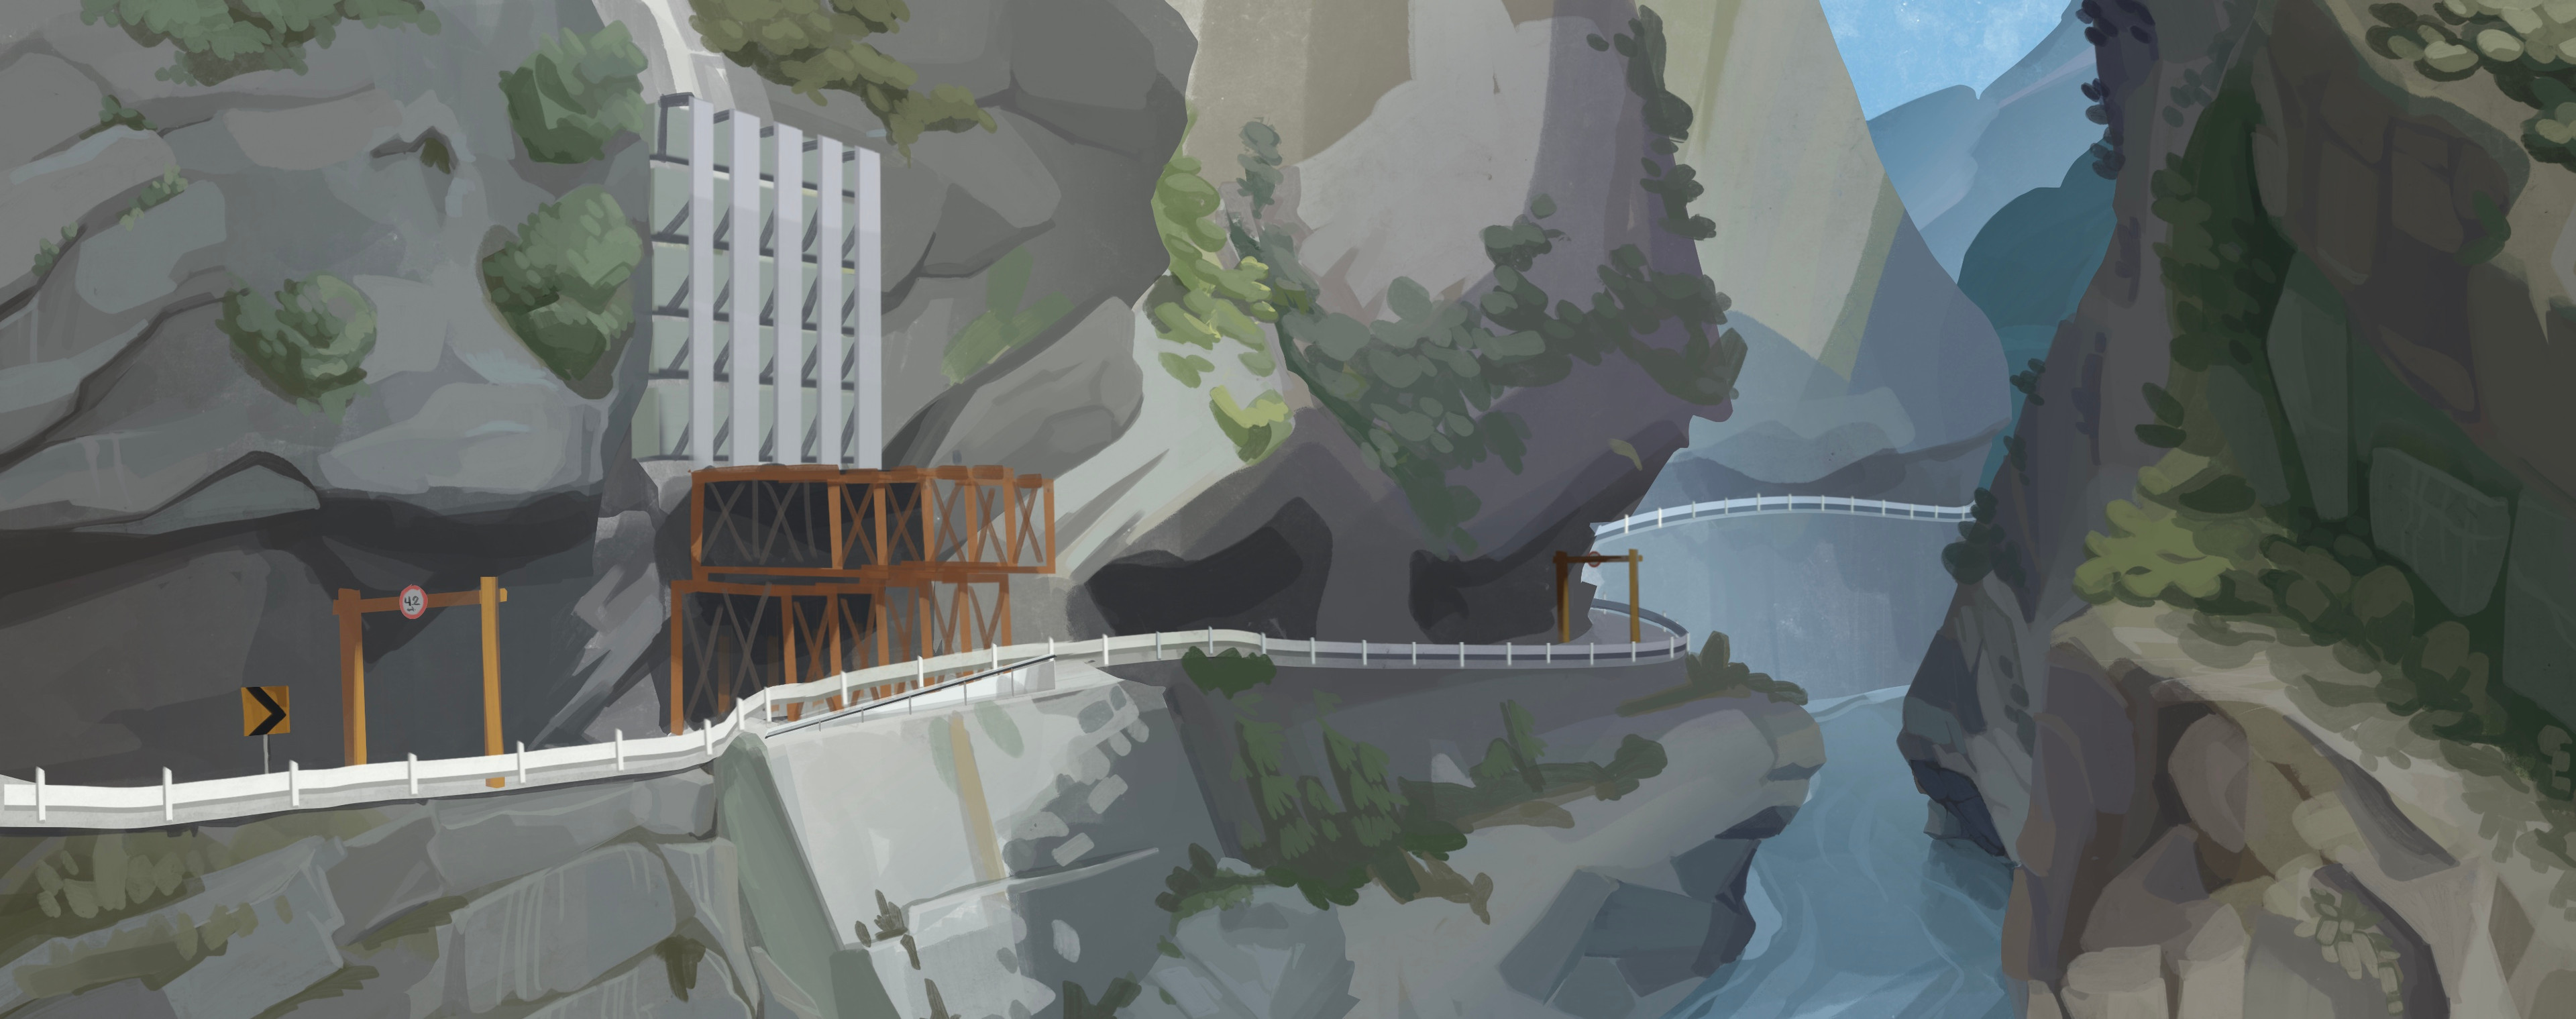 Another Plein air painting, this is Taroko Gorge, a very impressive mountain and river combination in Taiwan.